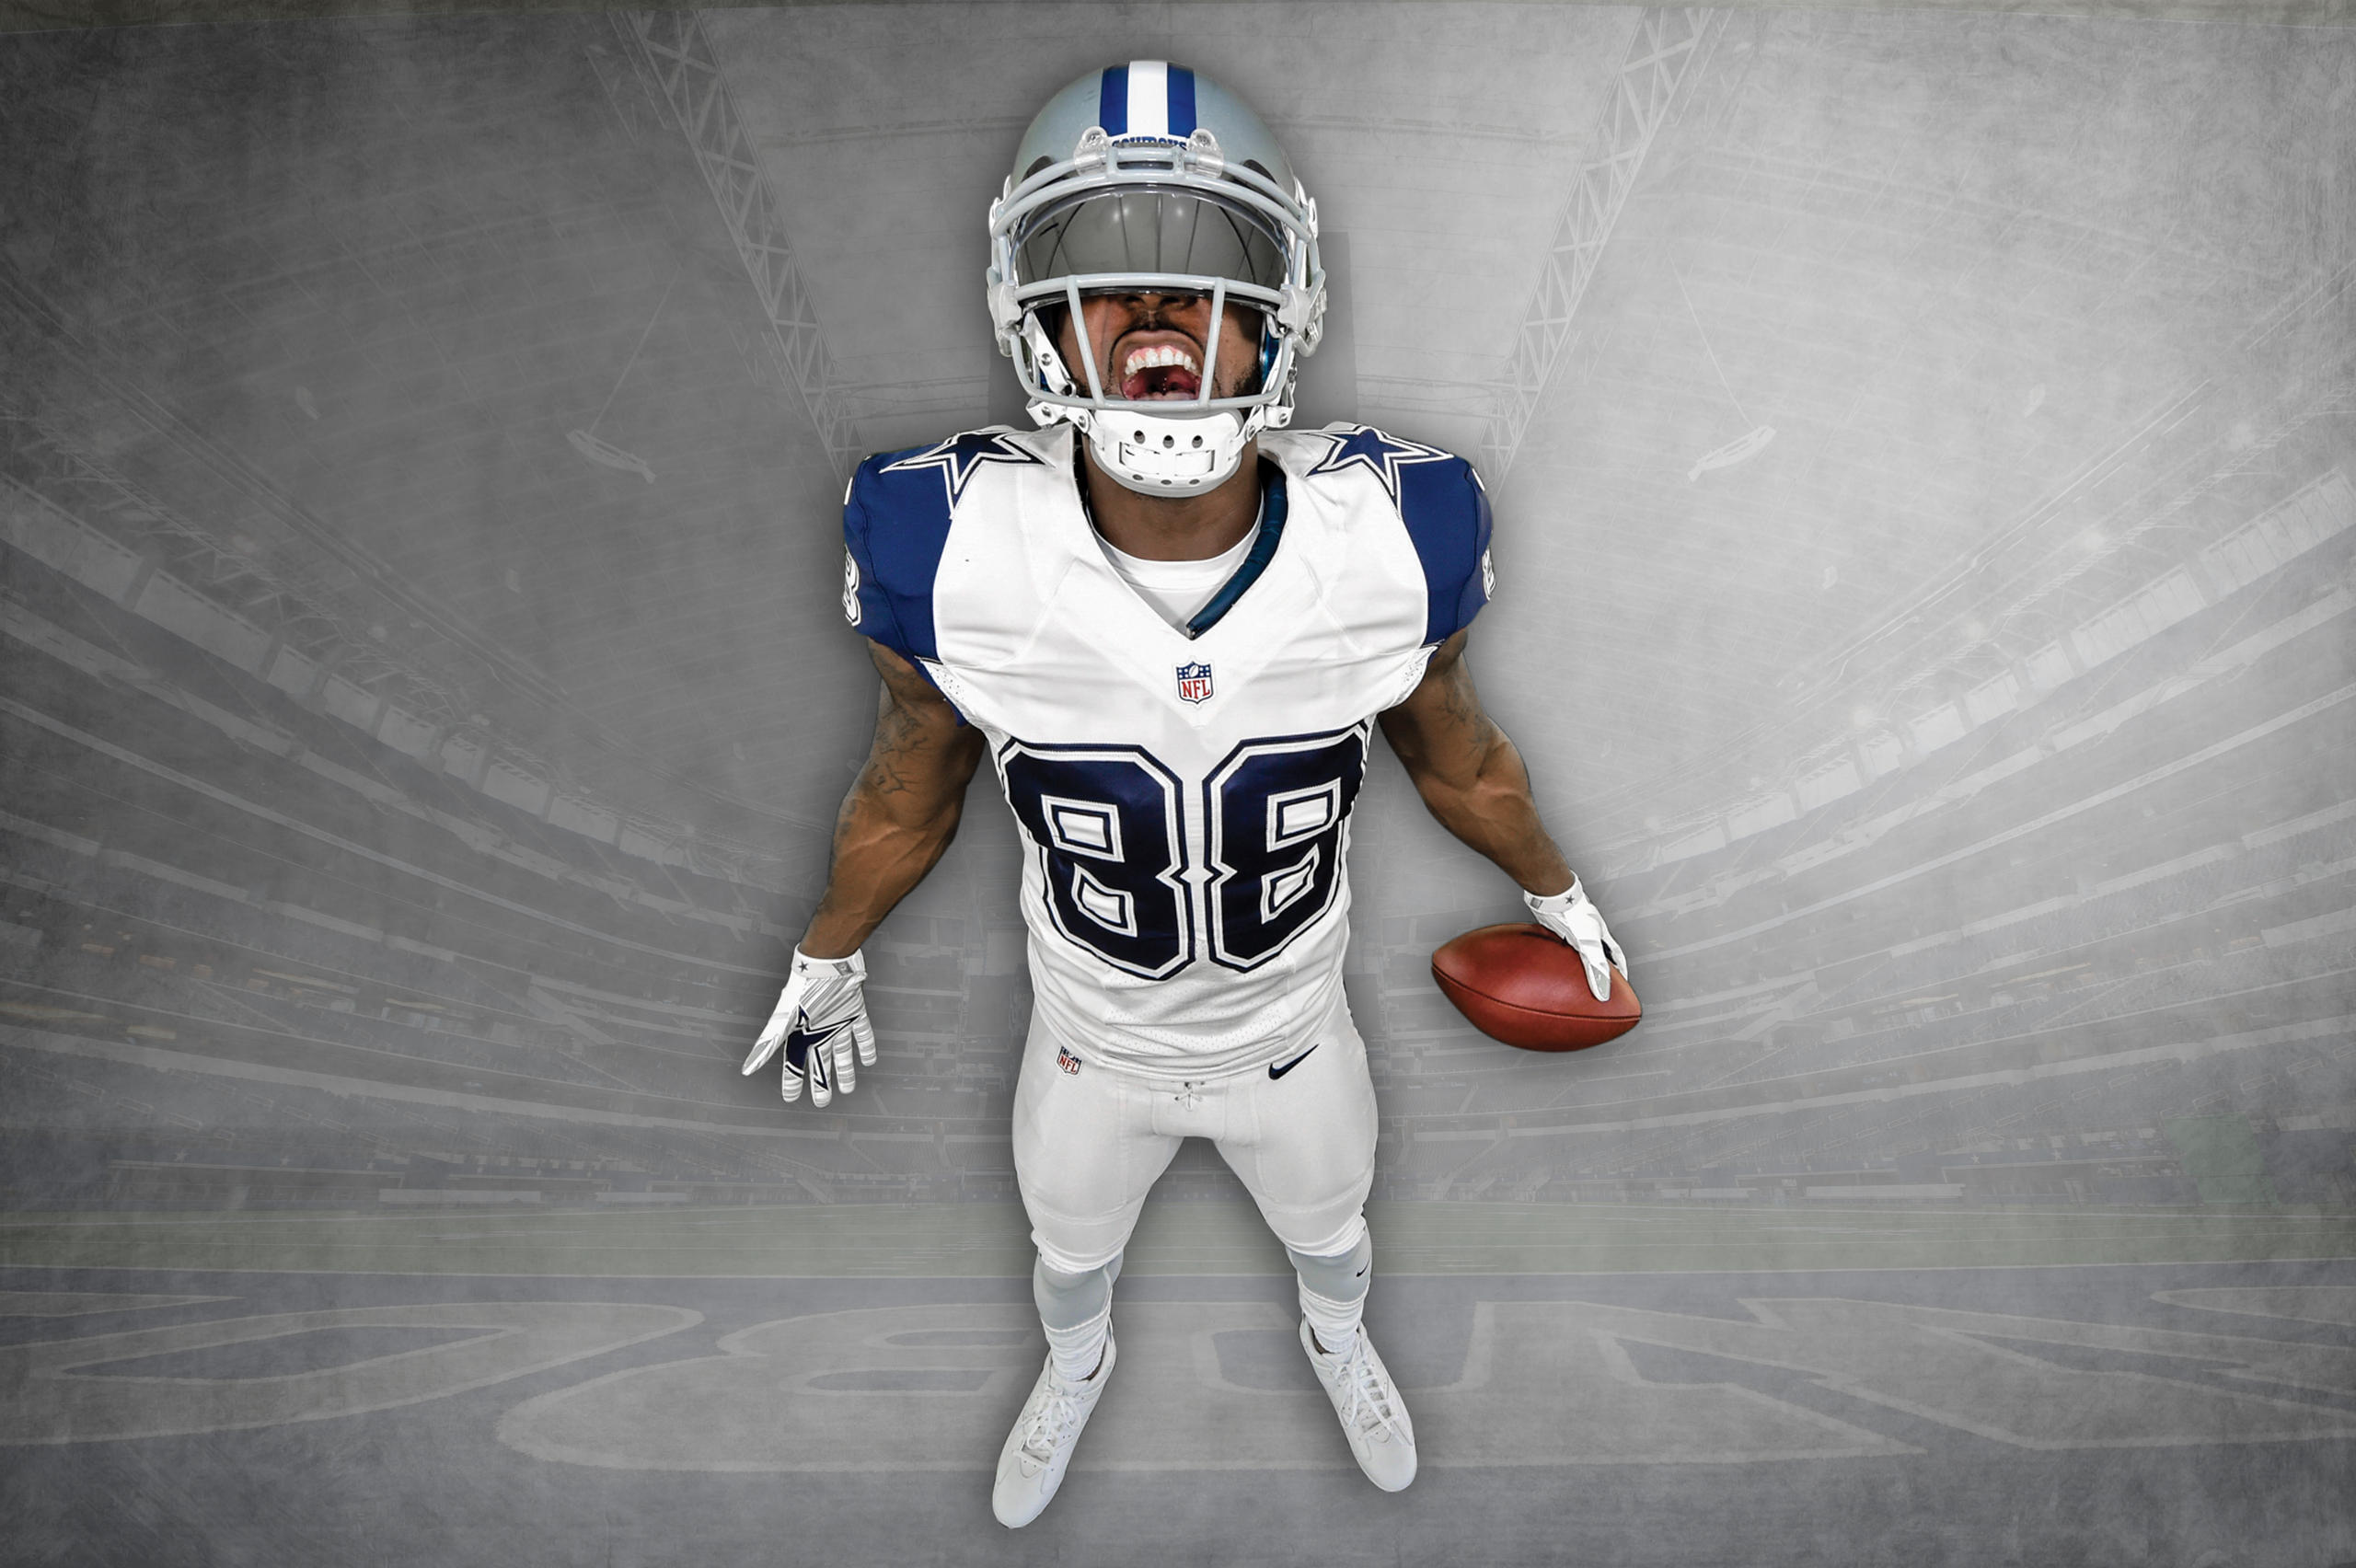 color rush dez bryant jersey